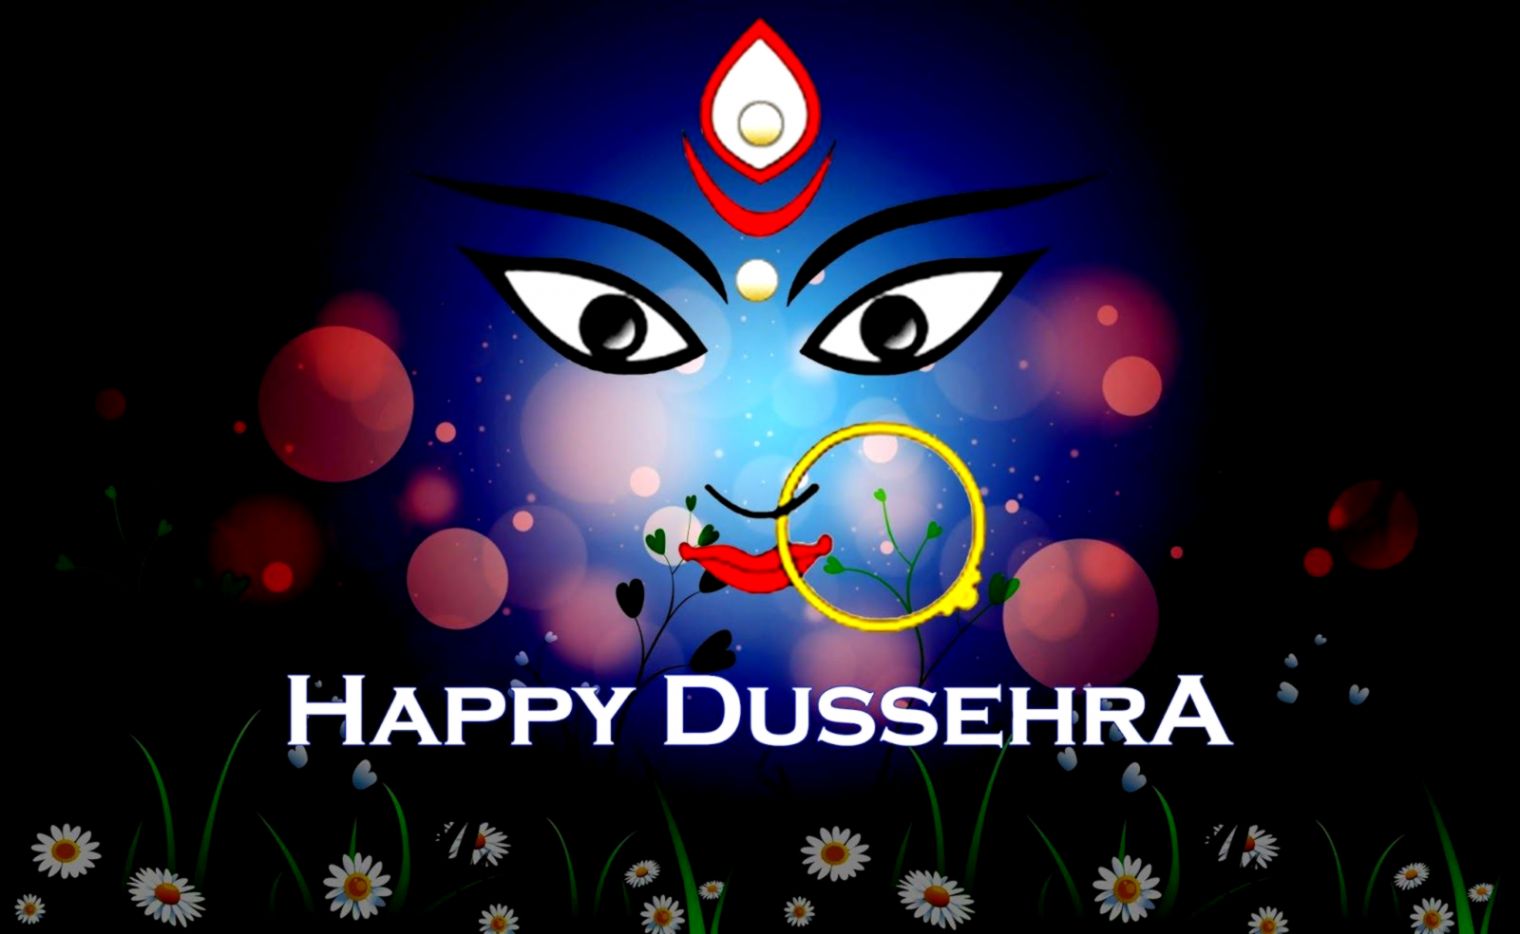 Happy Dussehra Wishes Hd Images Wallpapershappy Bathukamma - 1520x934  Wallpaper 